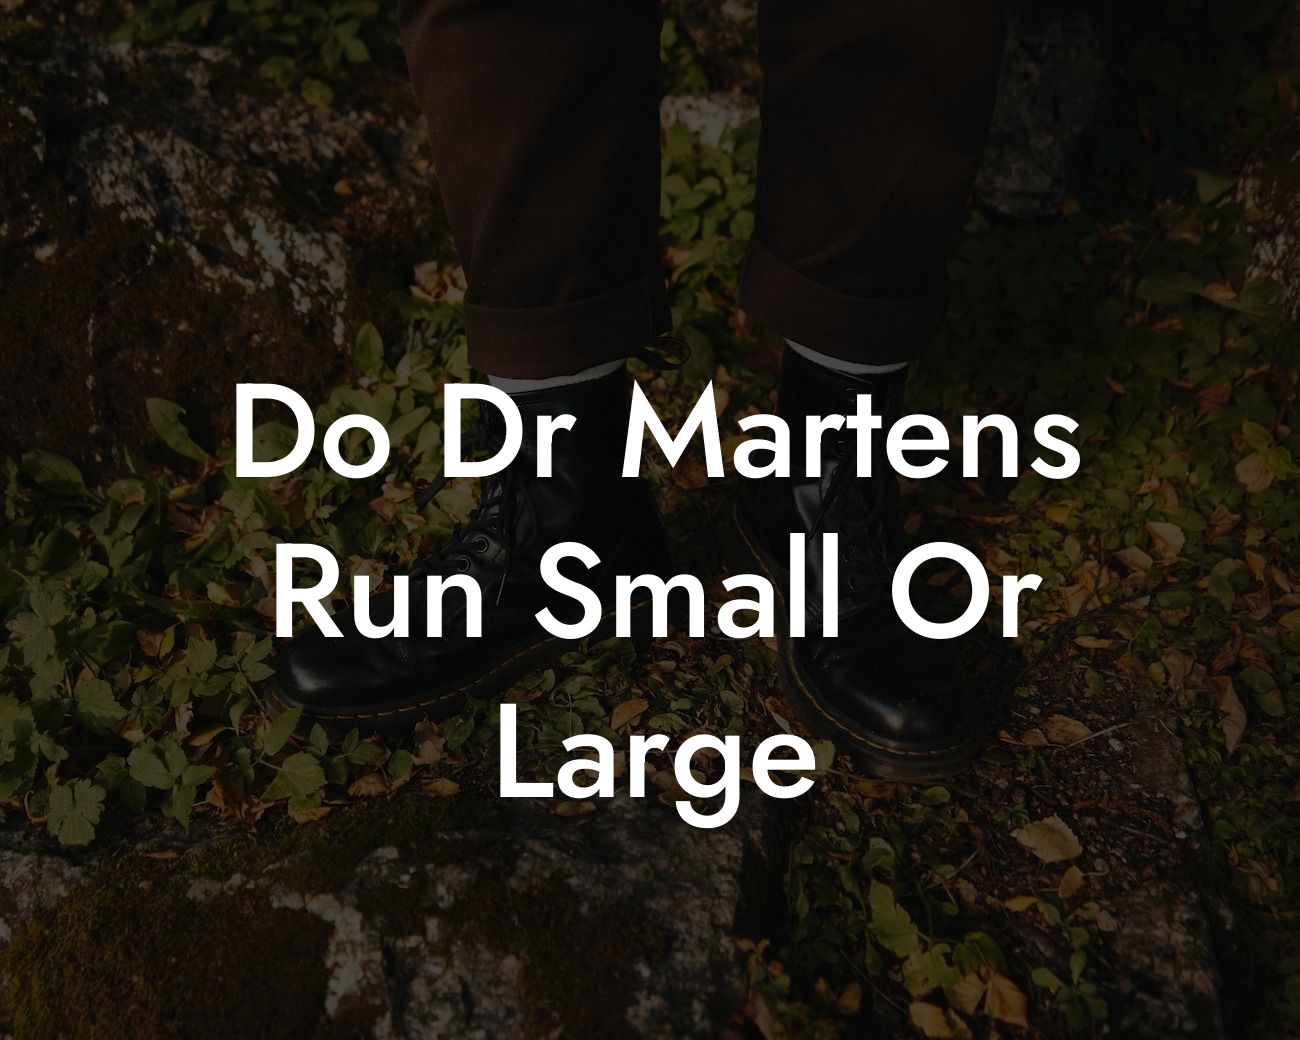 Do Dr Martens Run Small Or Large